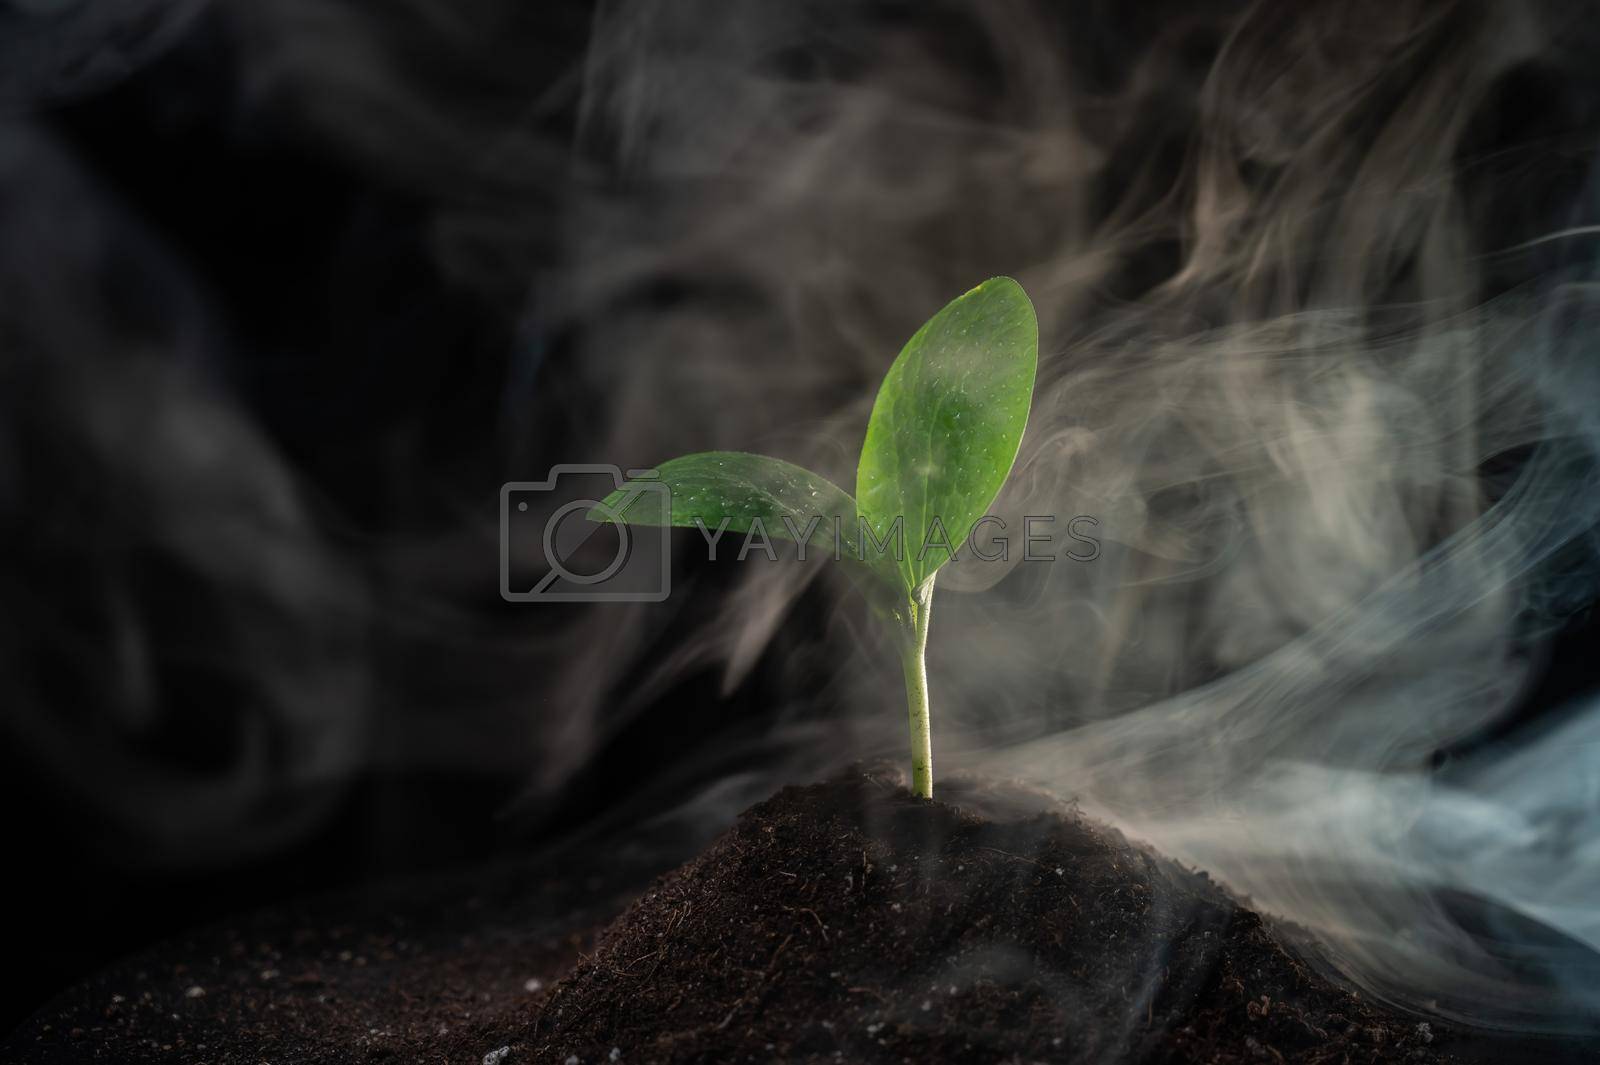 Royalty free image of Zucchini sprout in fog on a black background. by mrwed54